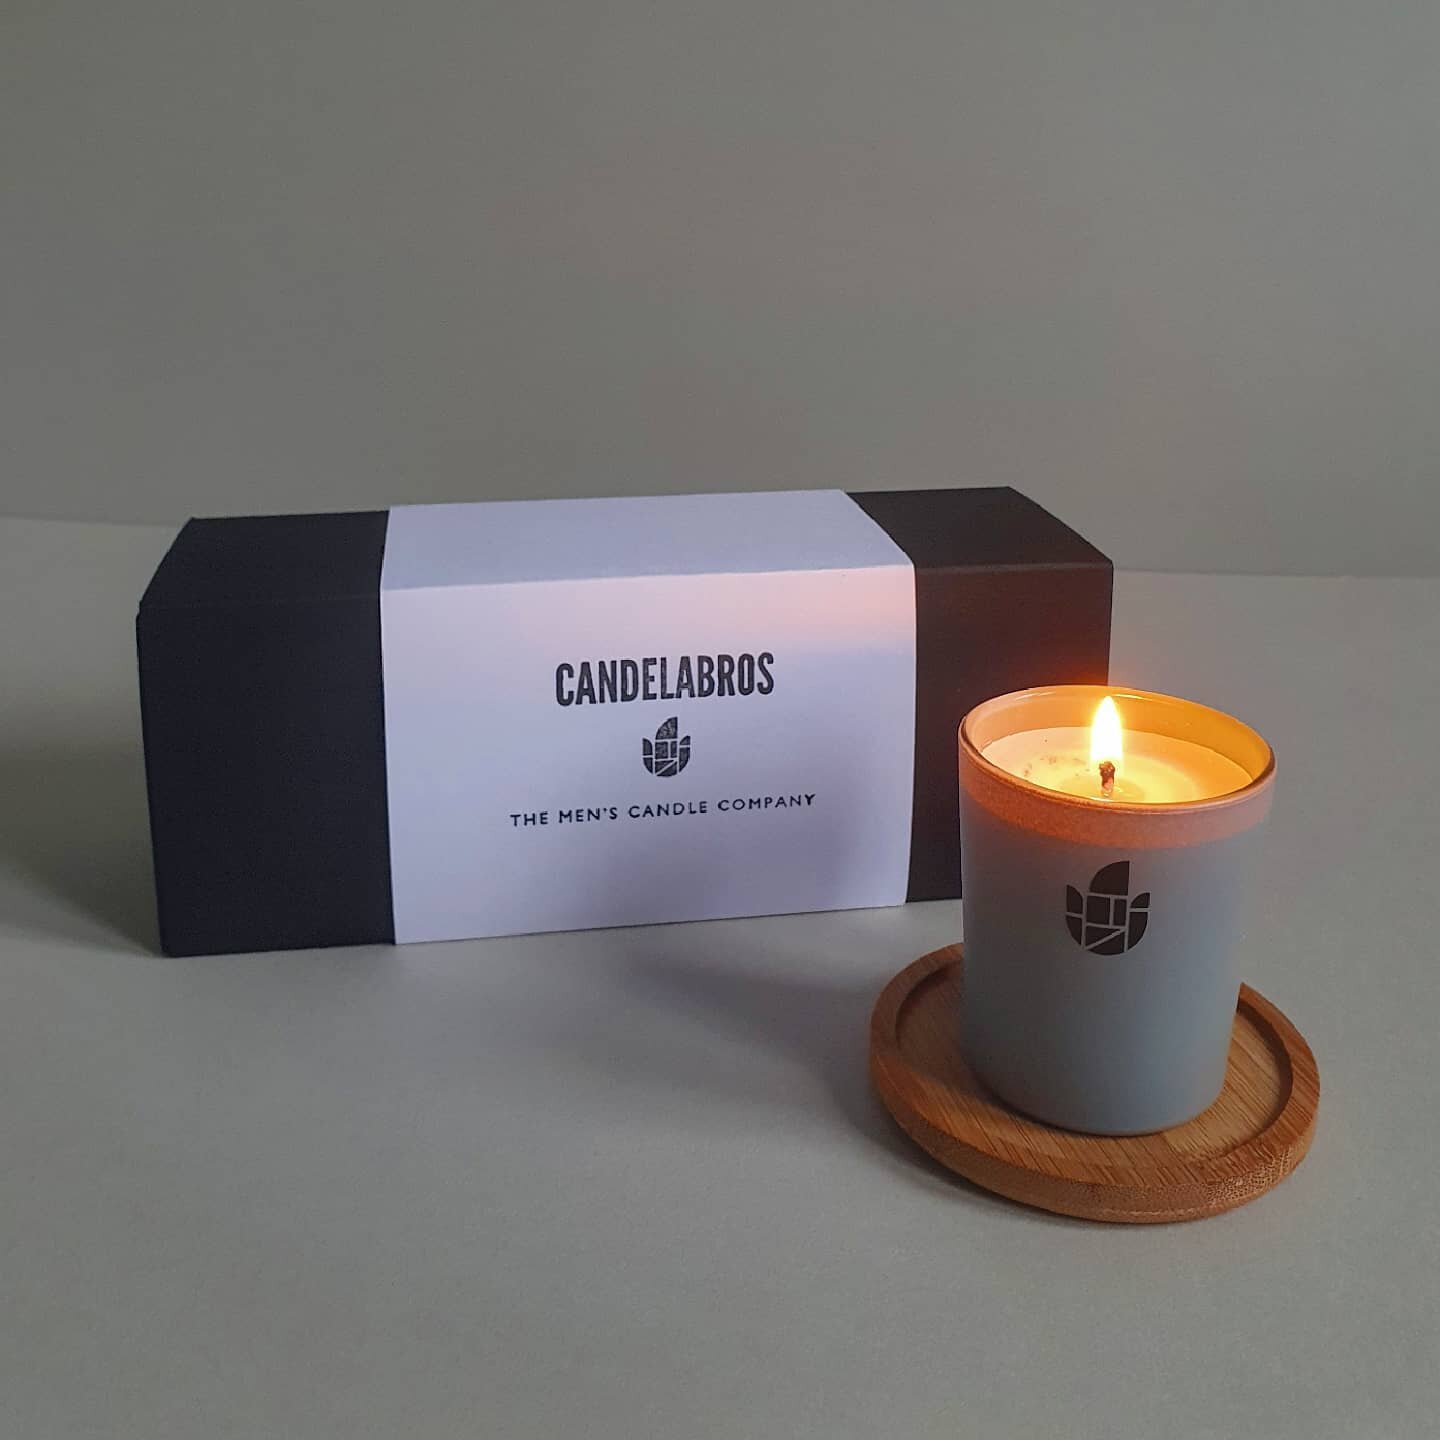 This little piggy is off to (Chelmsford High Street) market (Sunday 6th June).

#menscandles #candlesformen #mancave #scentedcandles #soycandle #homedecor #artisancandle #giftforhim #candleinspo #candleculture #candlesofinstagram #candlelover #mandle